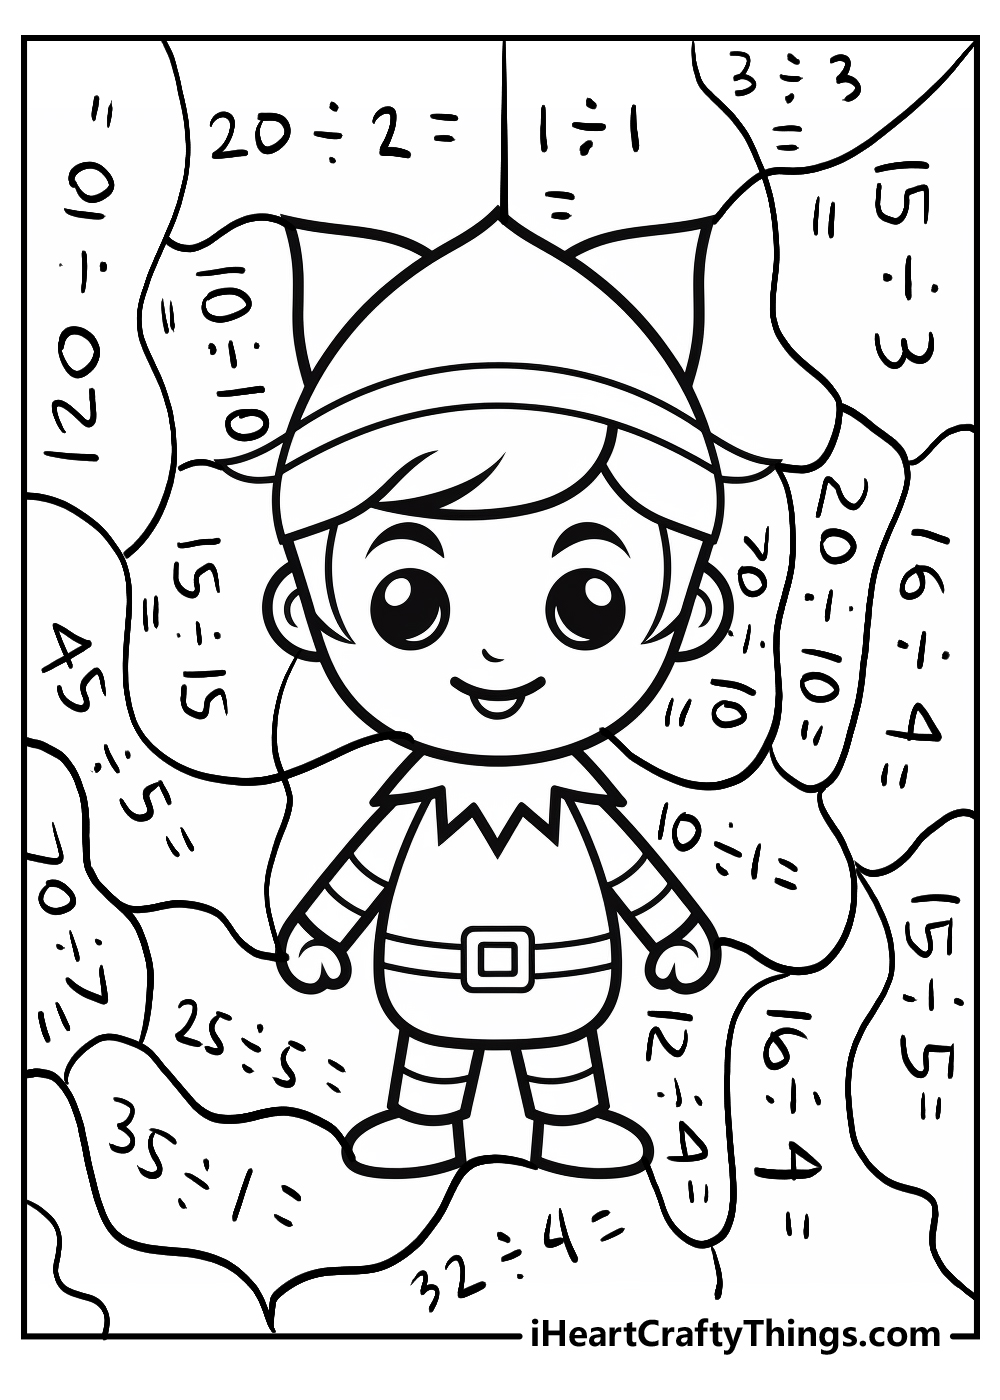 Printable math coloring pages updated